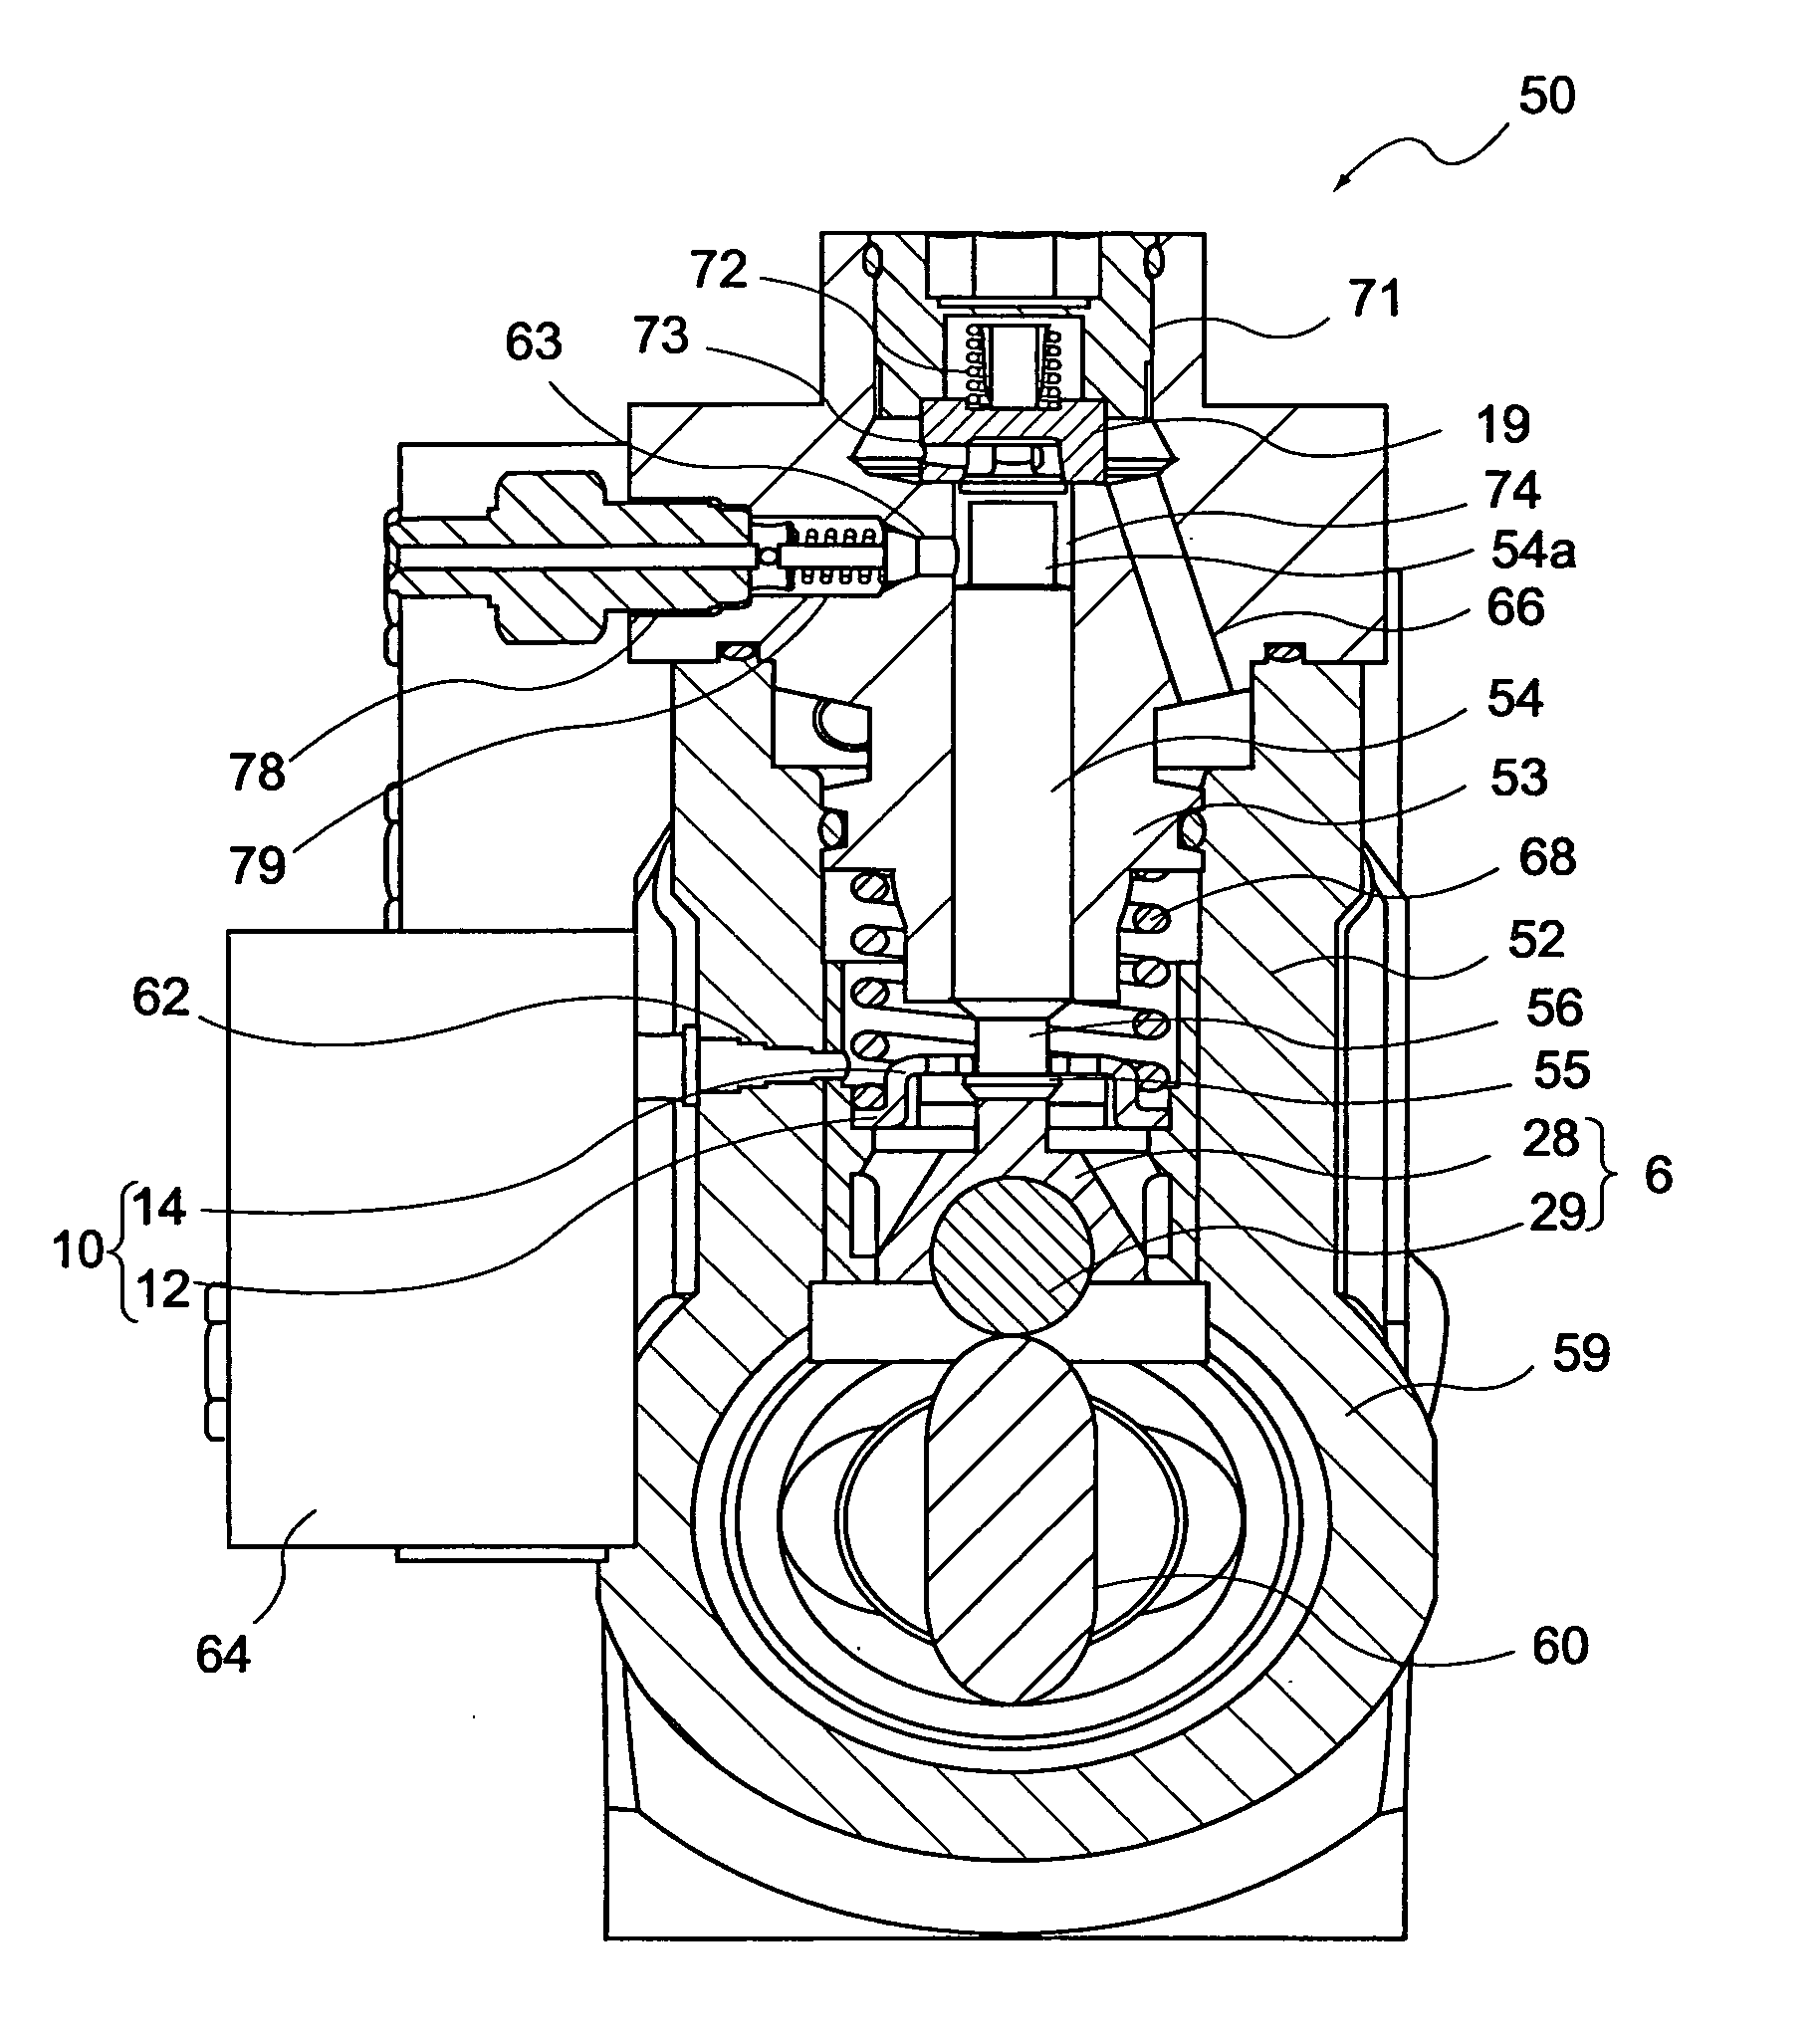 High flow rate fuel valve and fuel supply pump with the valve